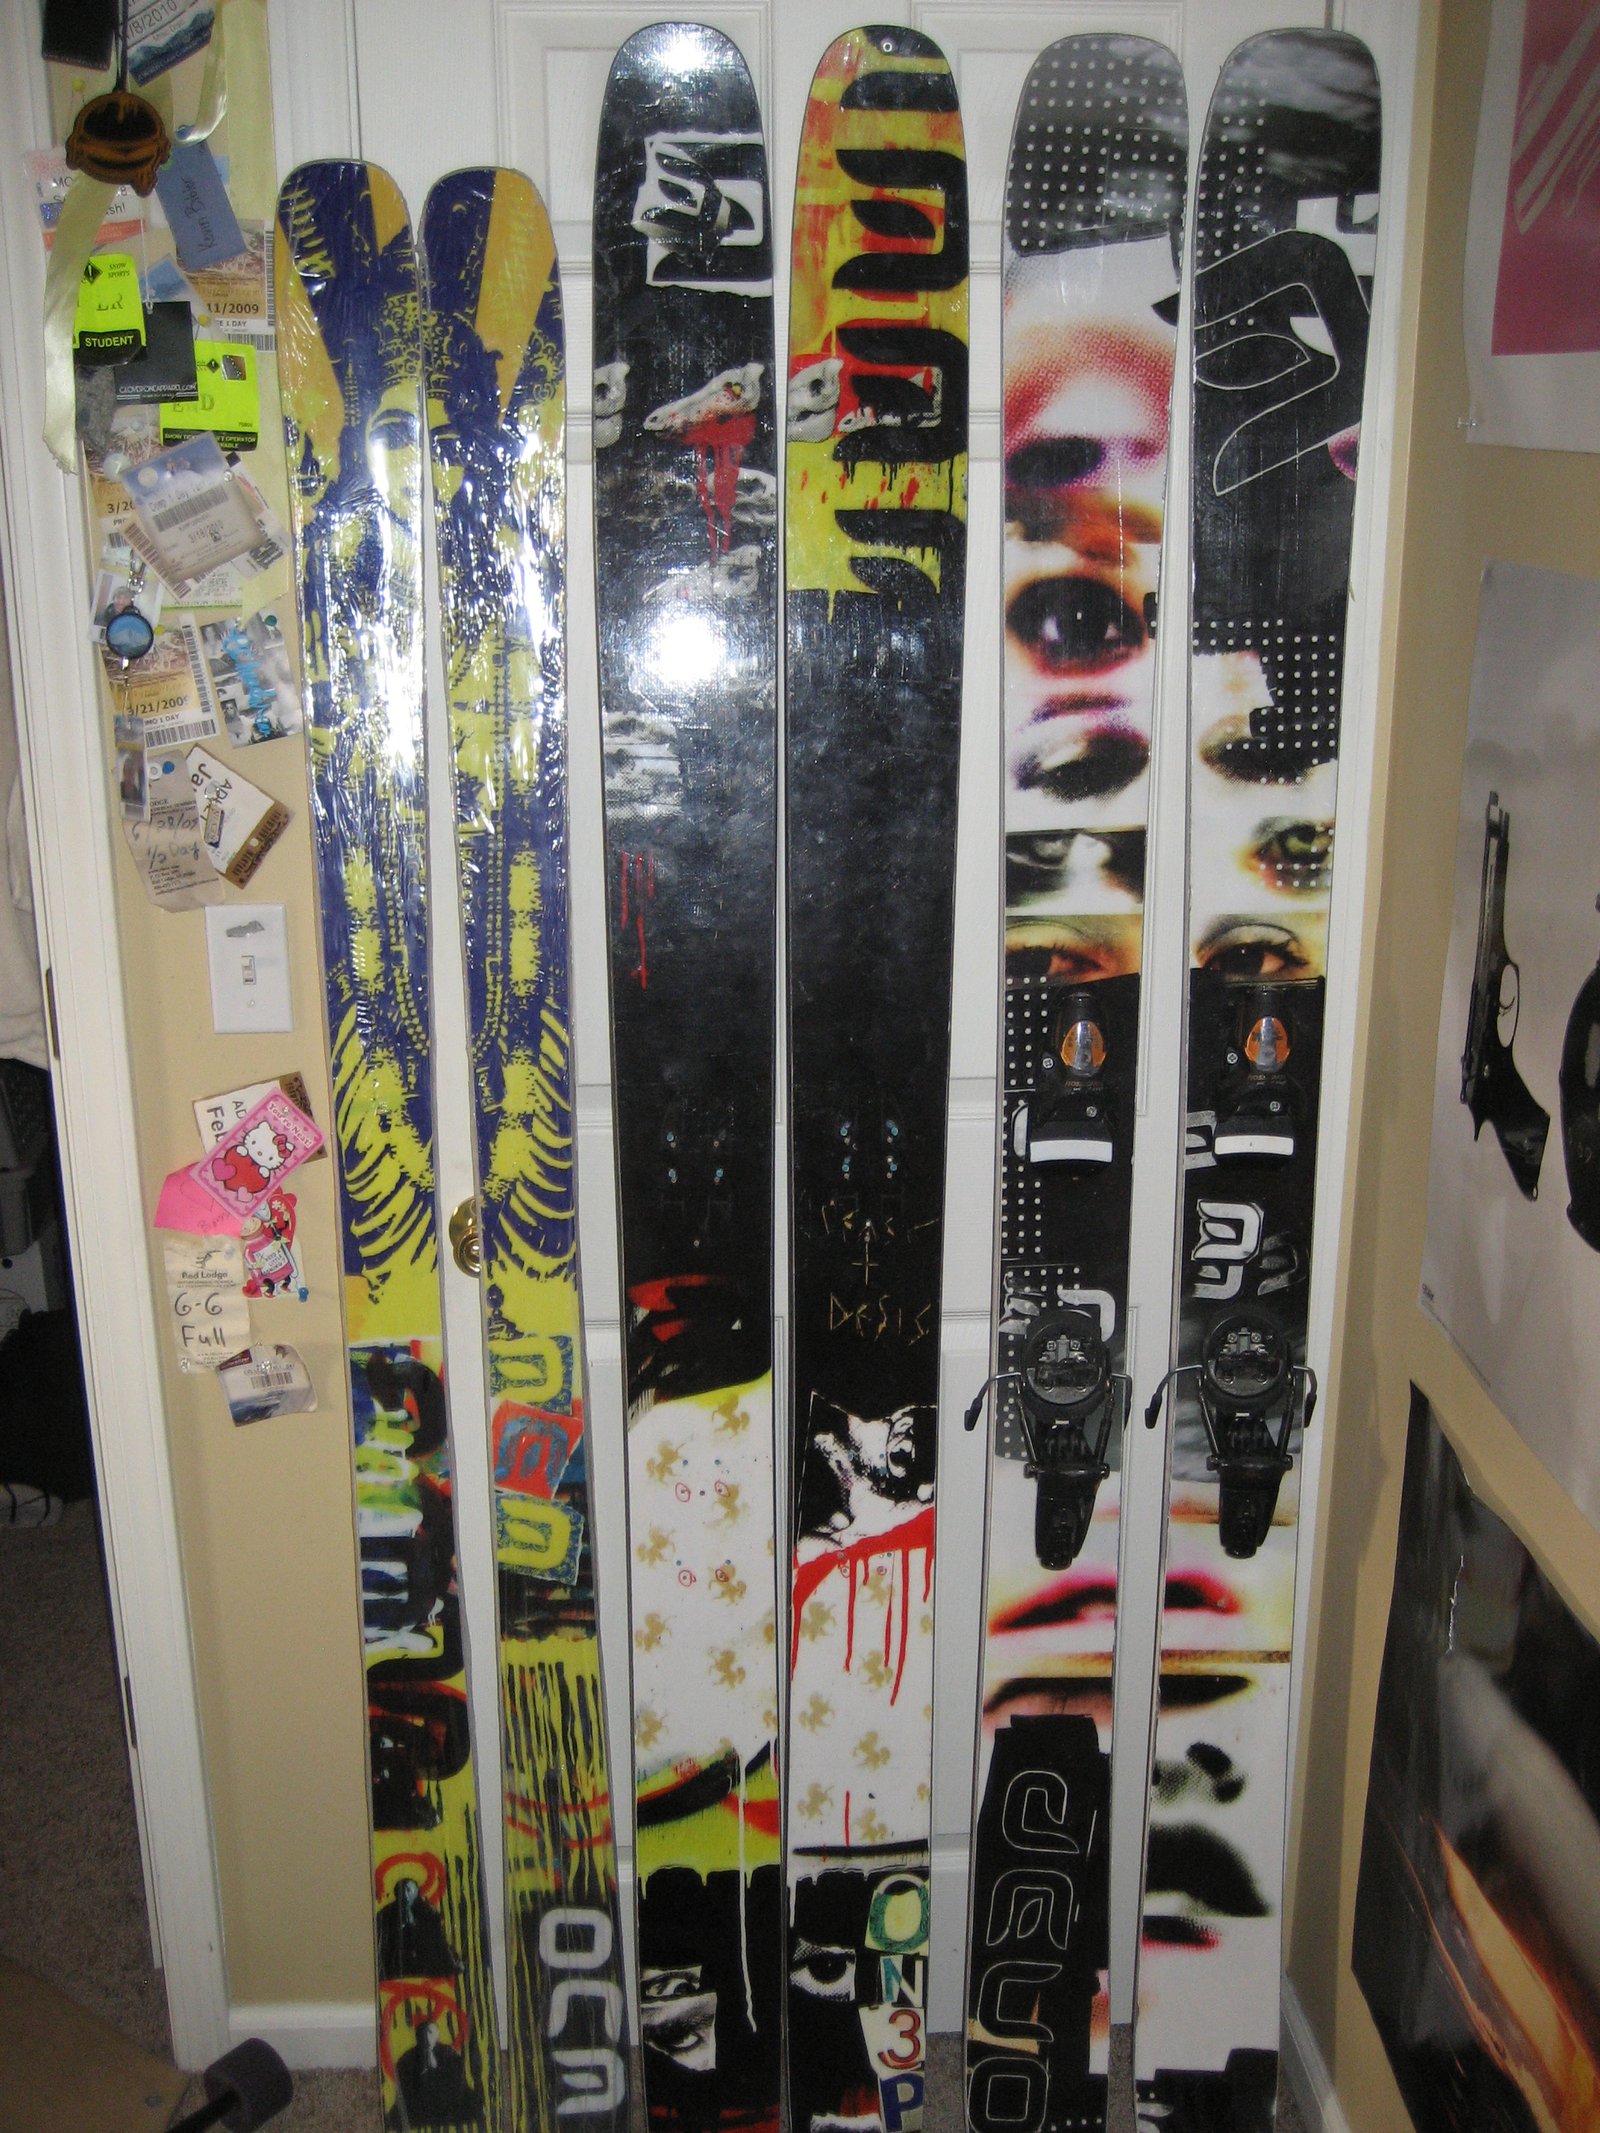 ON3P side of the quiver